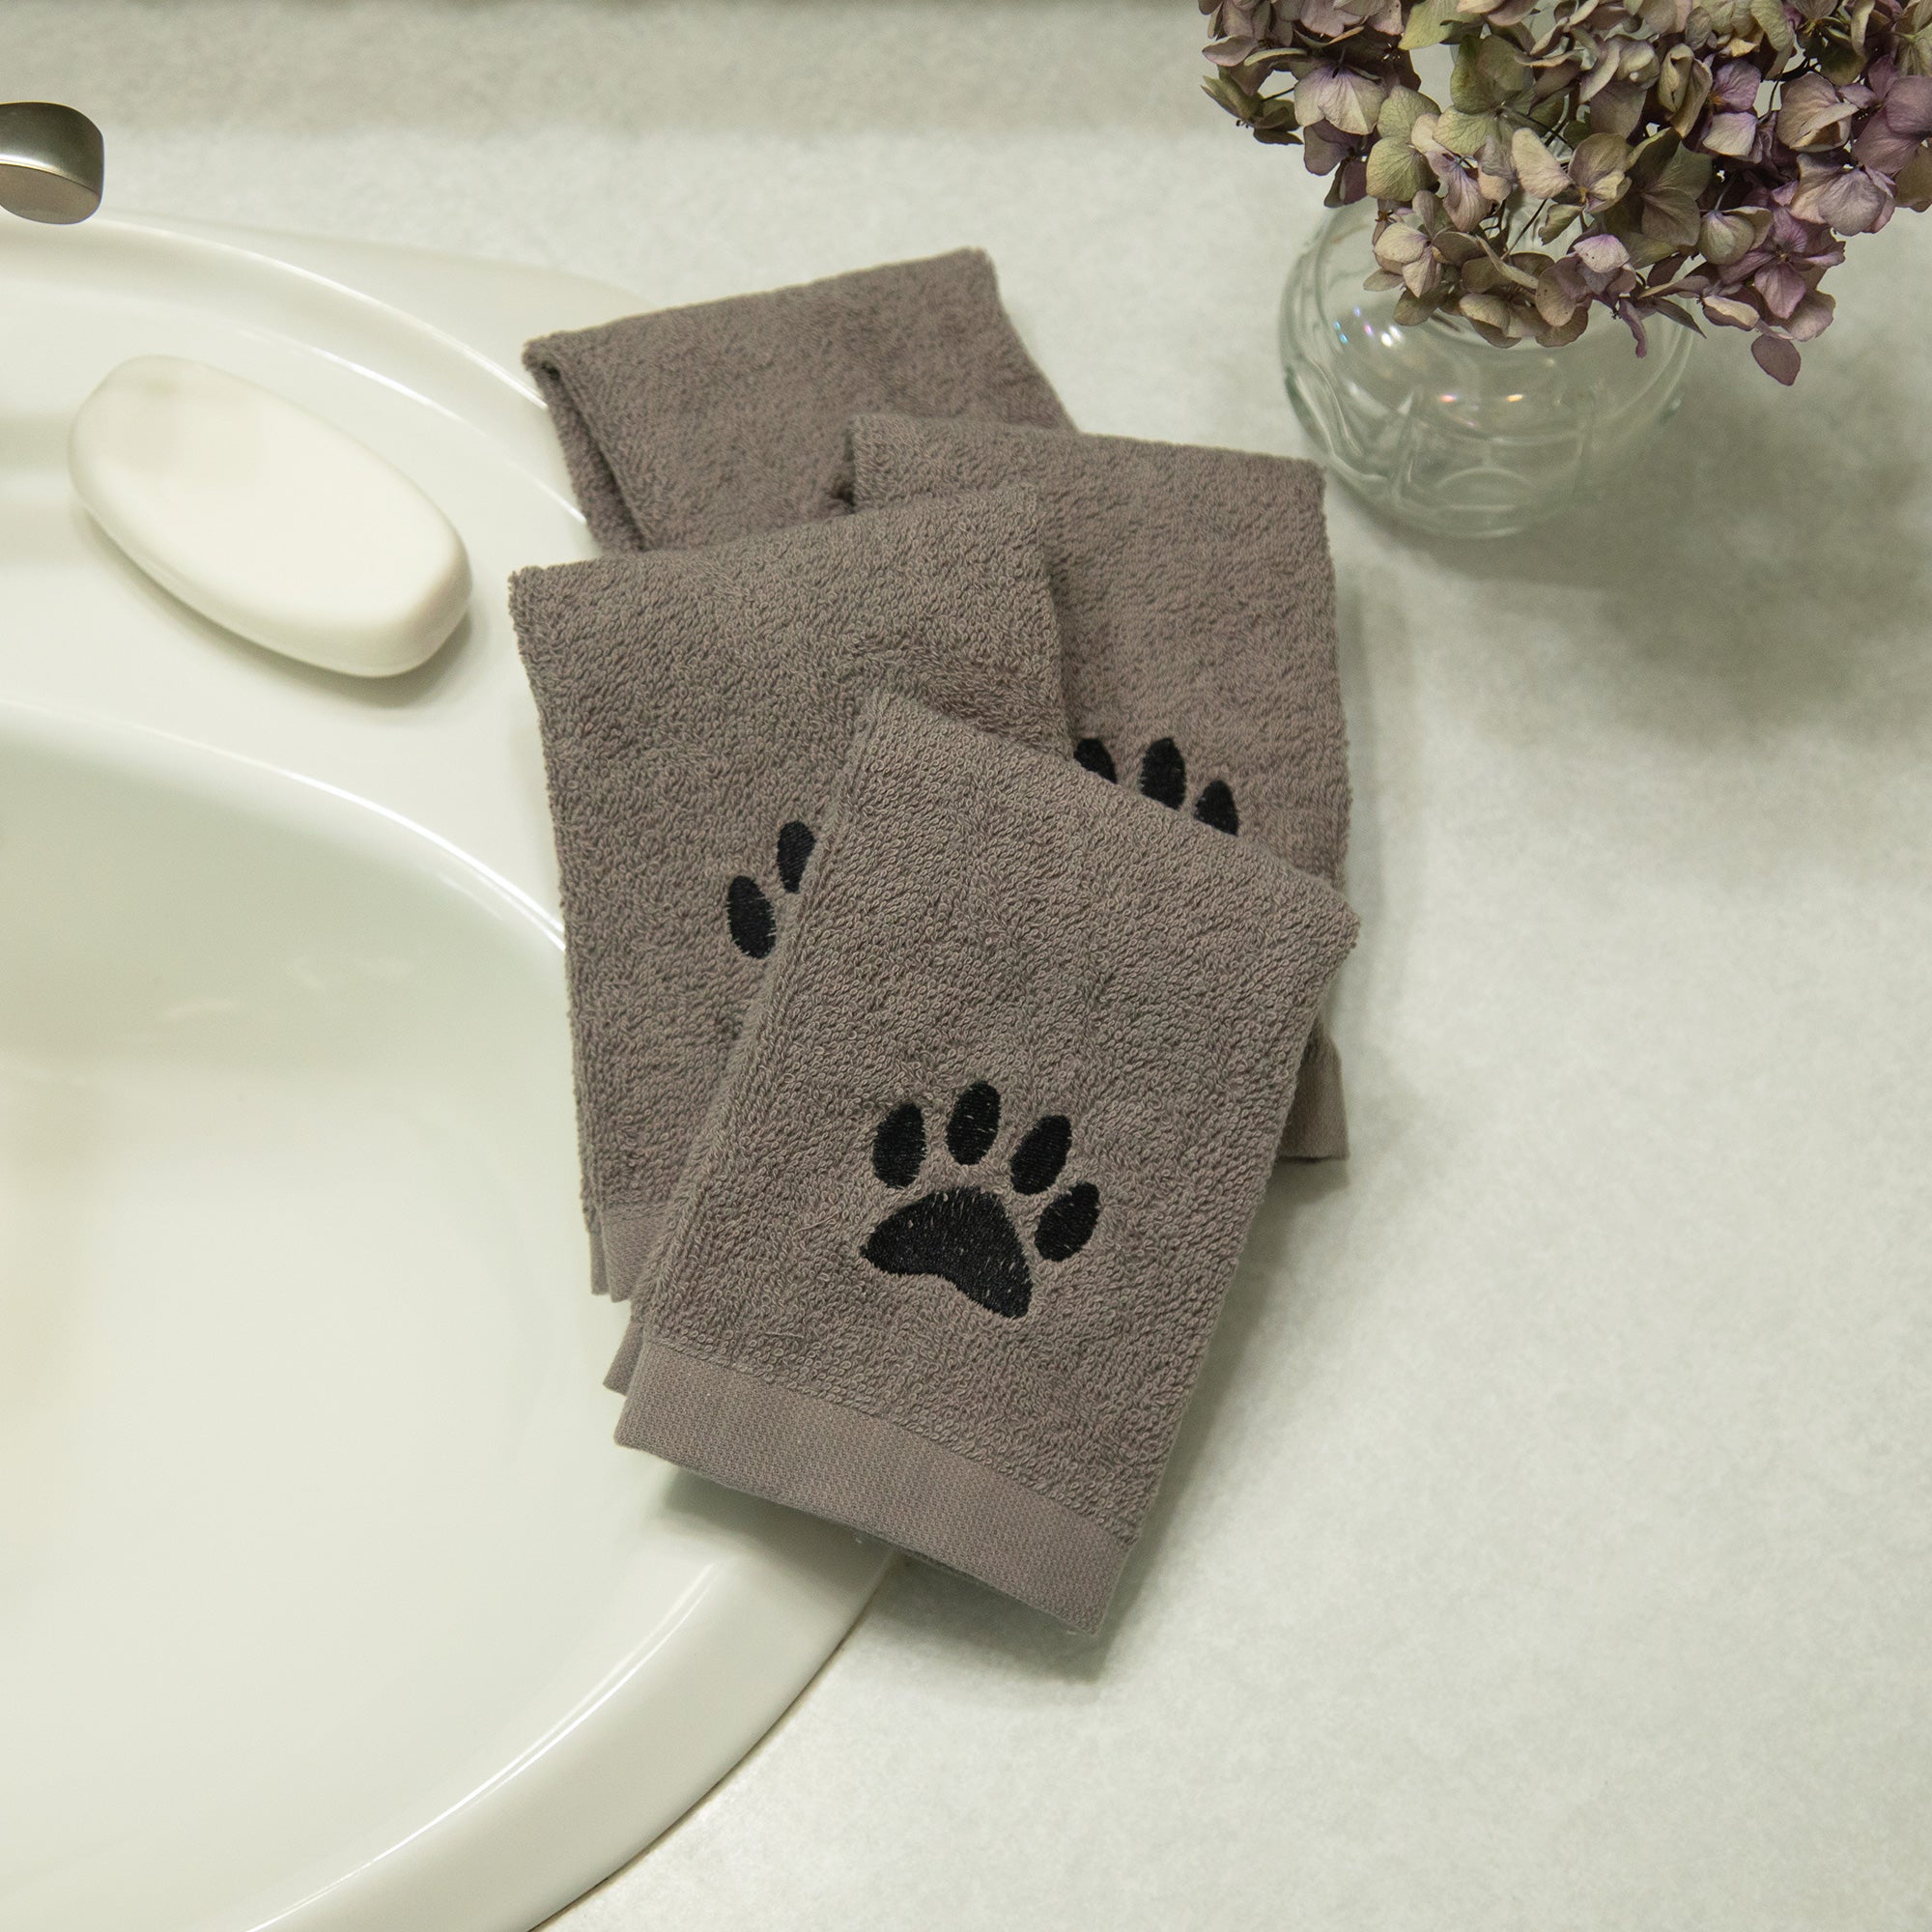 Embroidered Paw Wash Cloth - Set Of 4 - Black